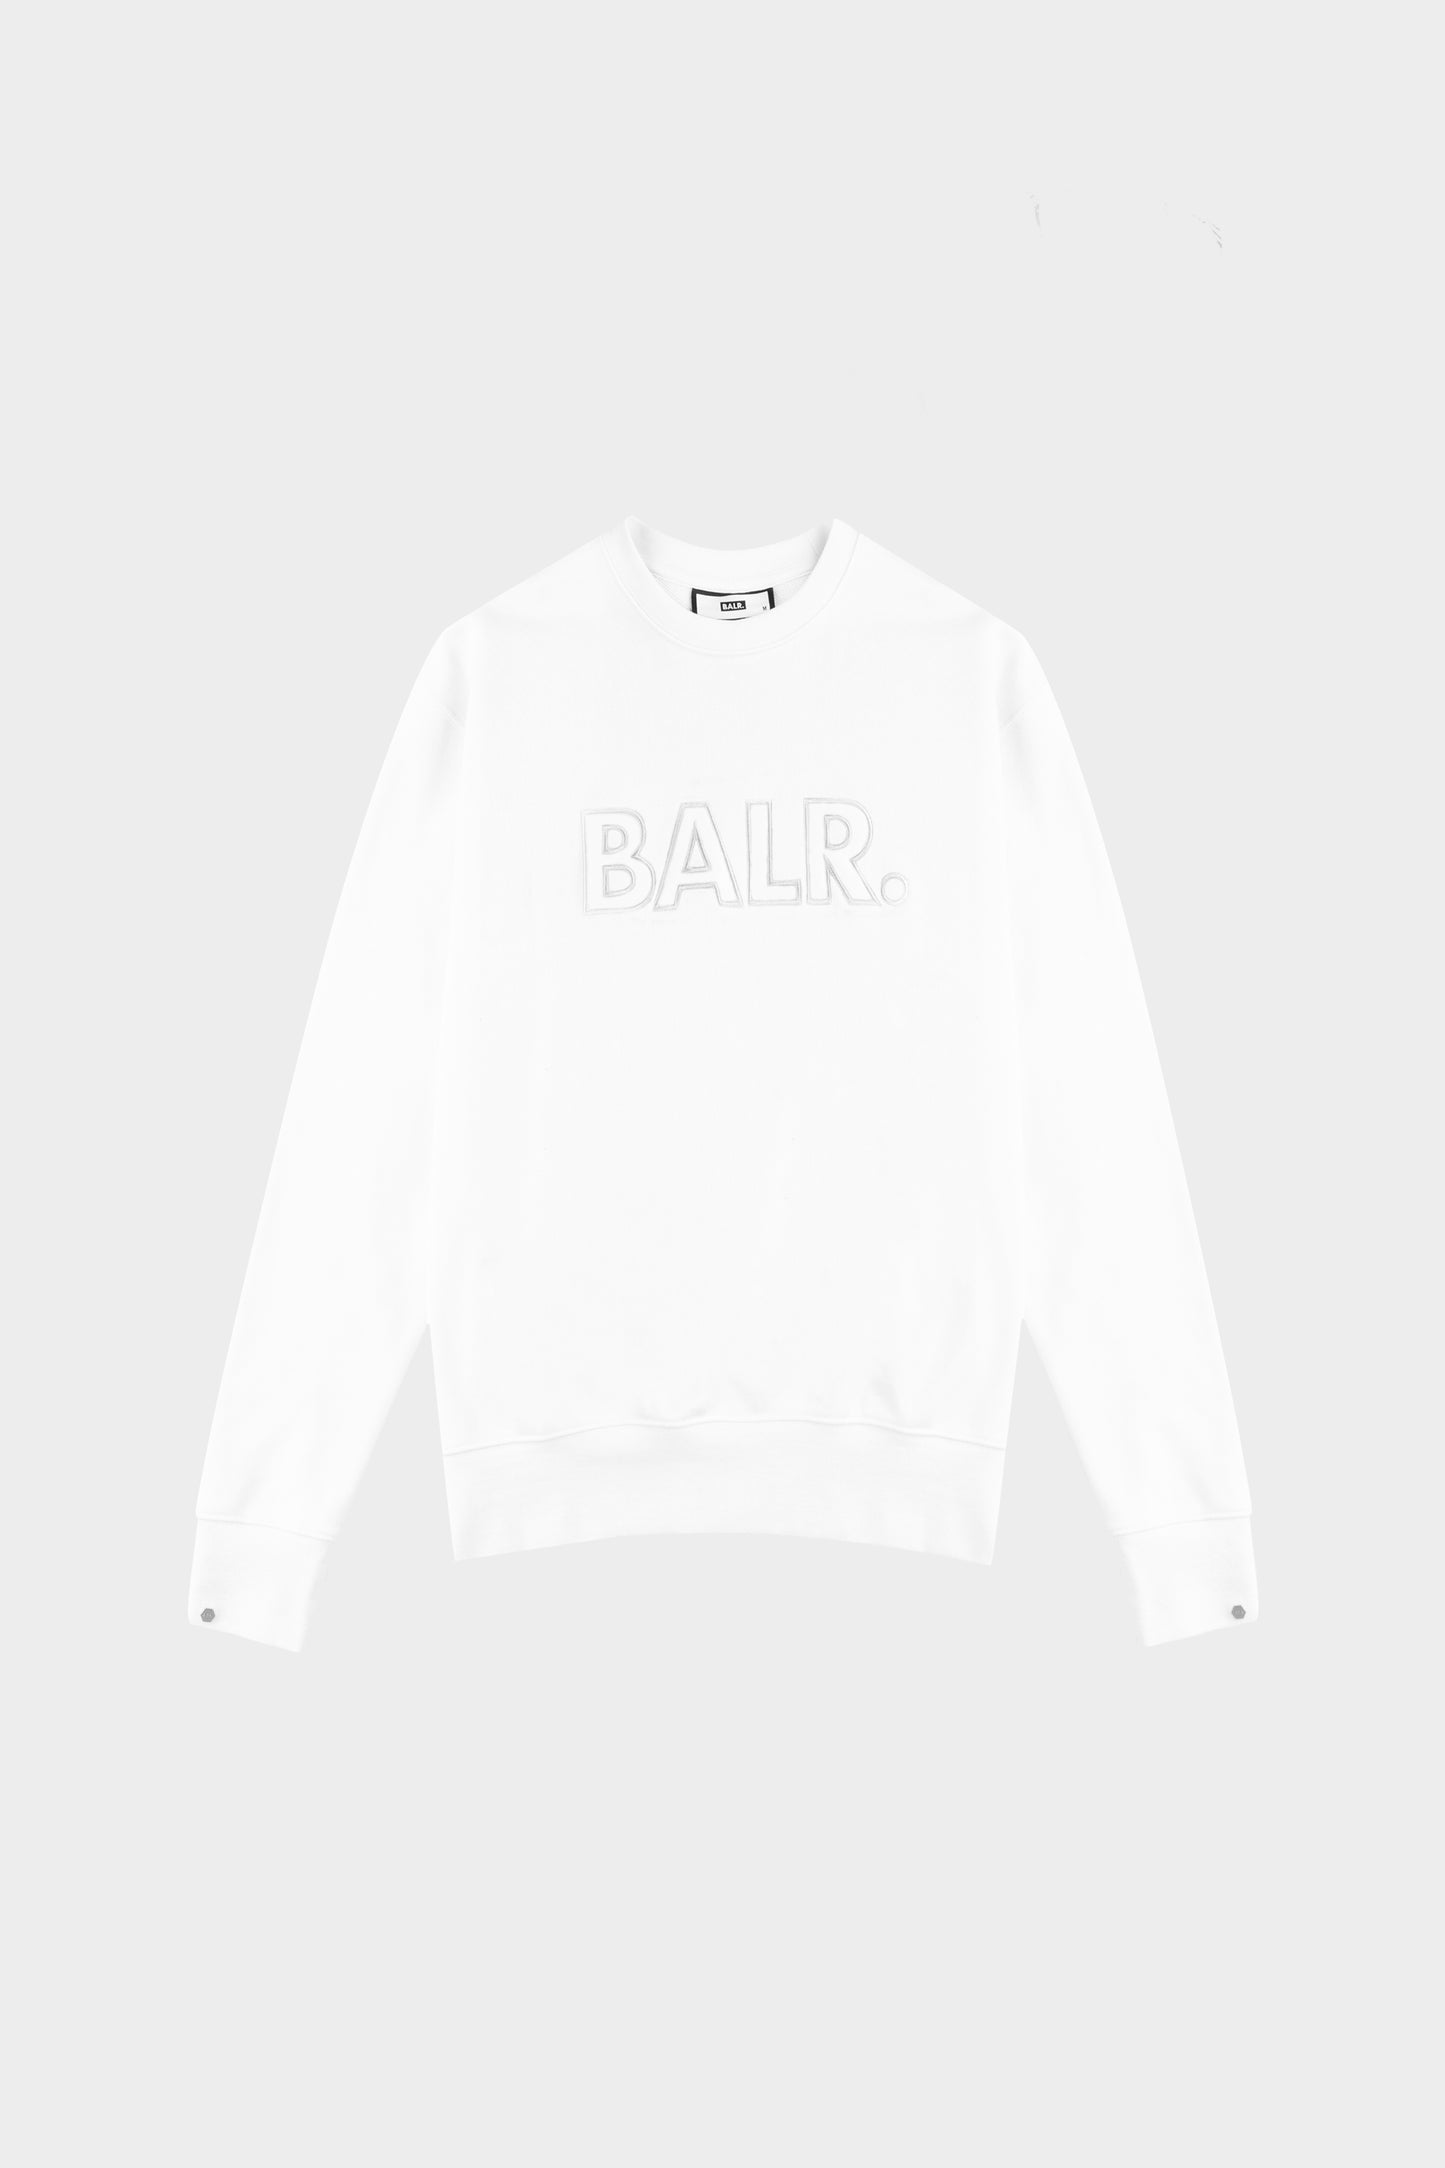 Pu Brand Relaxed Fit Crewneck Light Stone